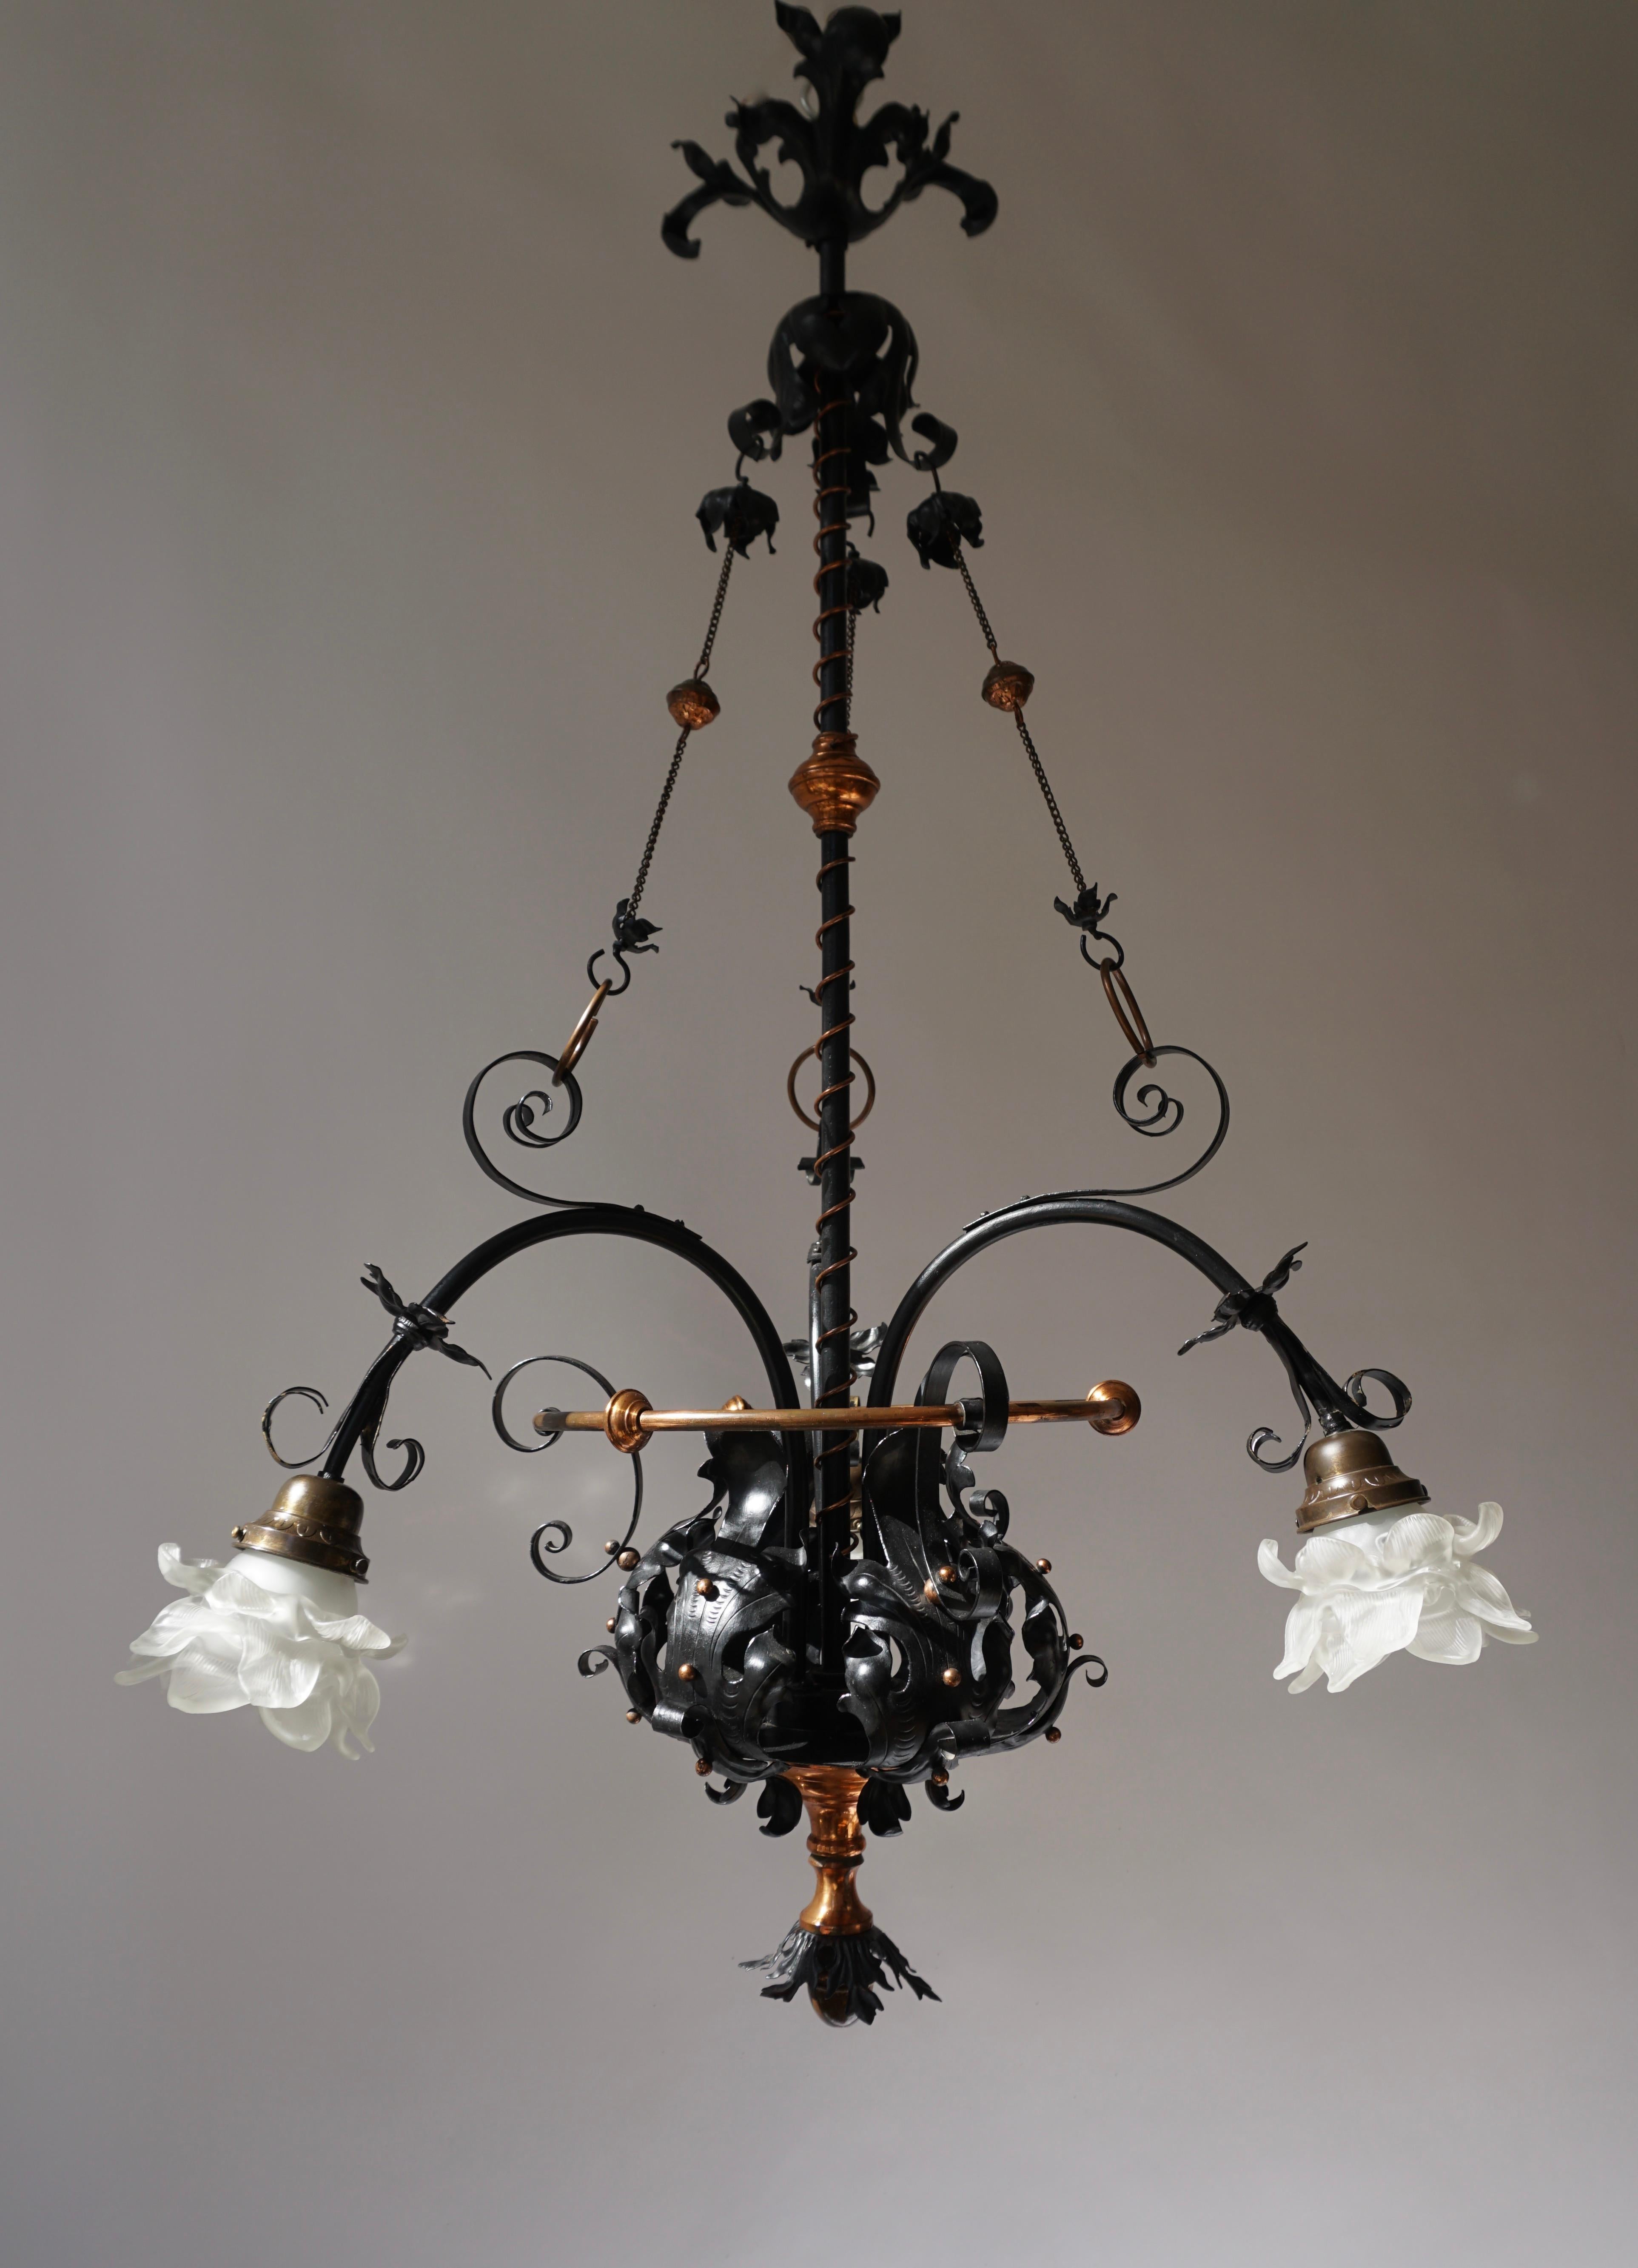 Extraordinary decoratif chandelier, made of wrought-iron and brass, carrying leave-motifs and with three arms, each with a glass cap. 
The iron being stained black and the brass guilt.
The light requires three single E27 screw fit